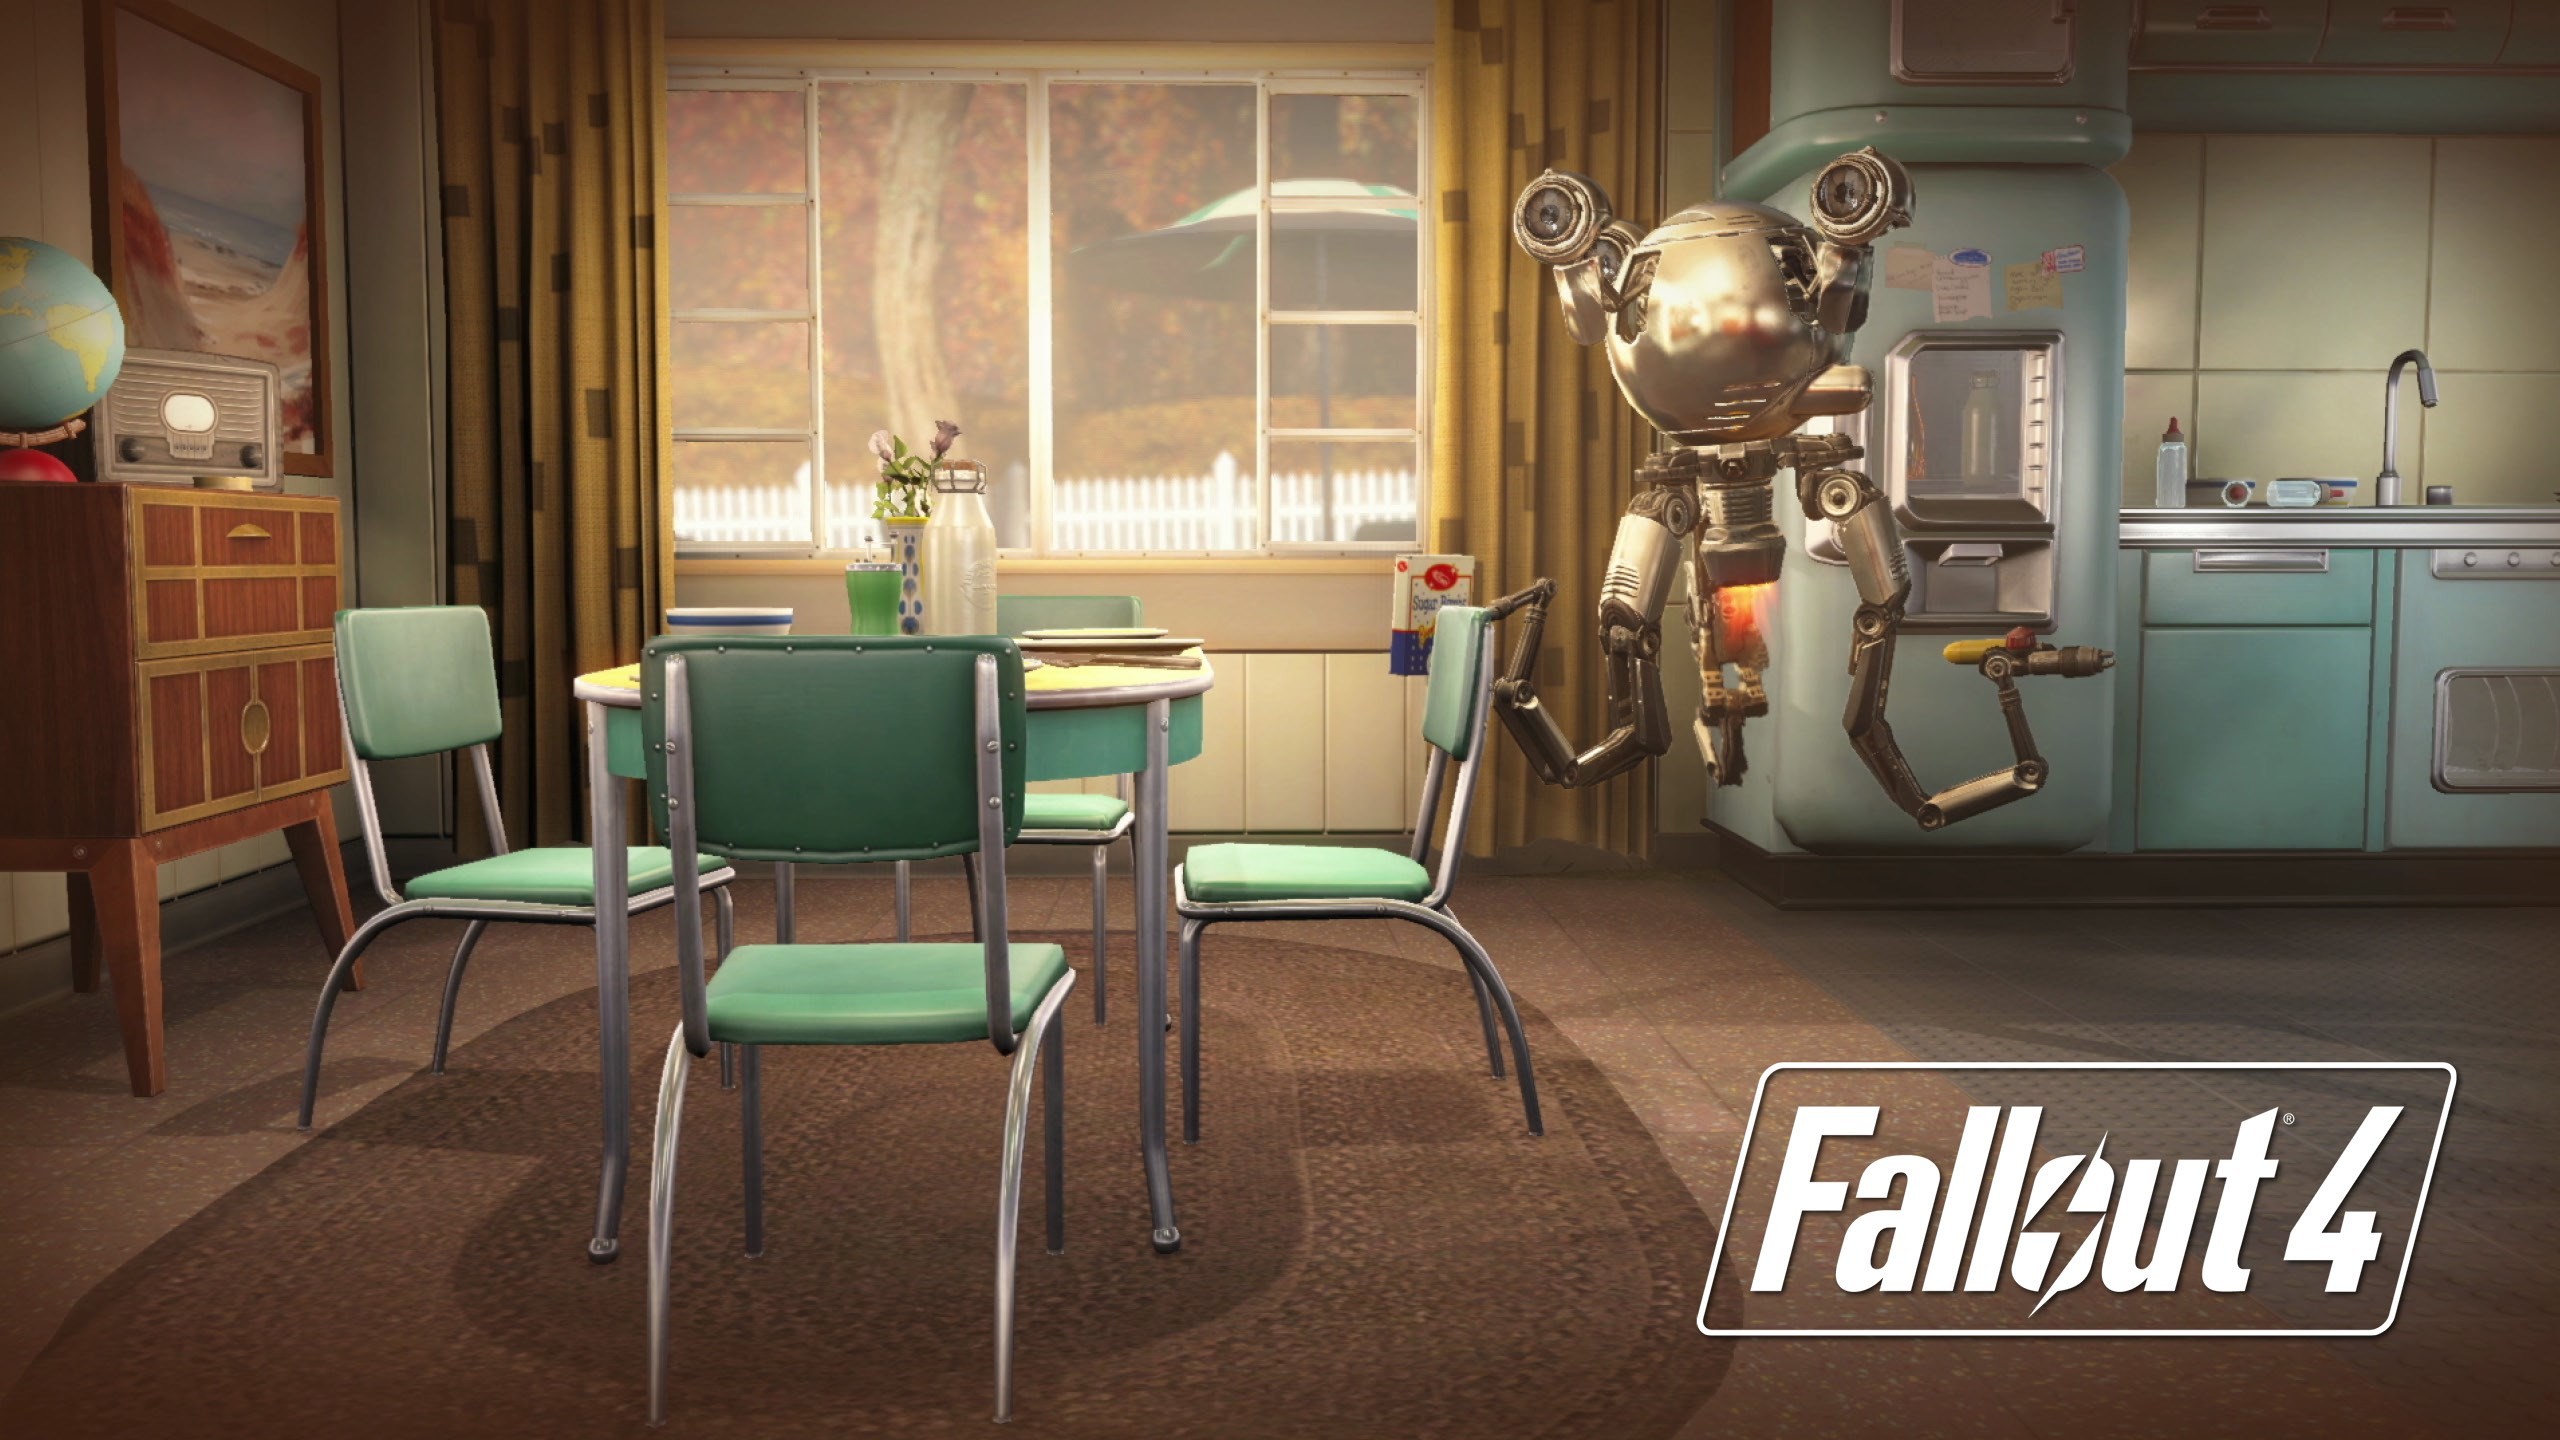 2560x1440  px Fallout 4 wallpaper - Full HD Wallpapers, Photos by Ned  Sinclair